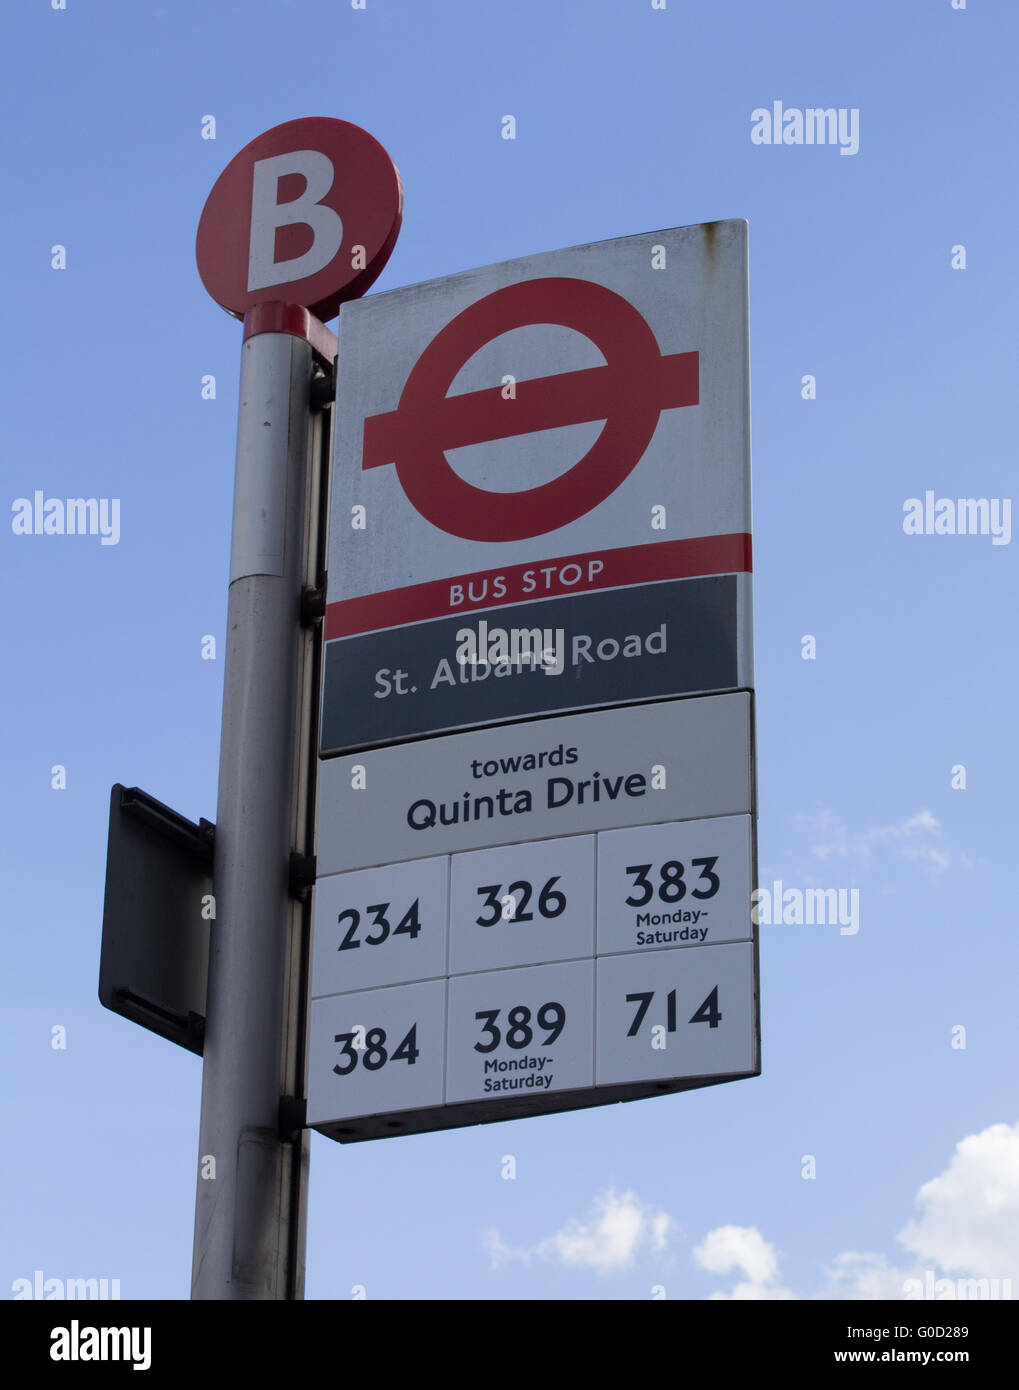 London Bus Stop sign located on St. Albans Road, High Barnet, London, UK Stock Photo